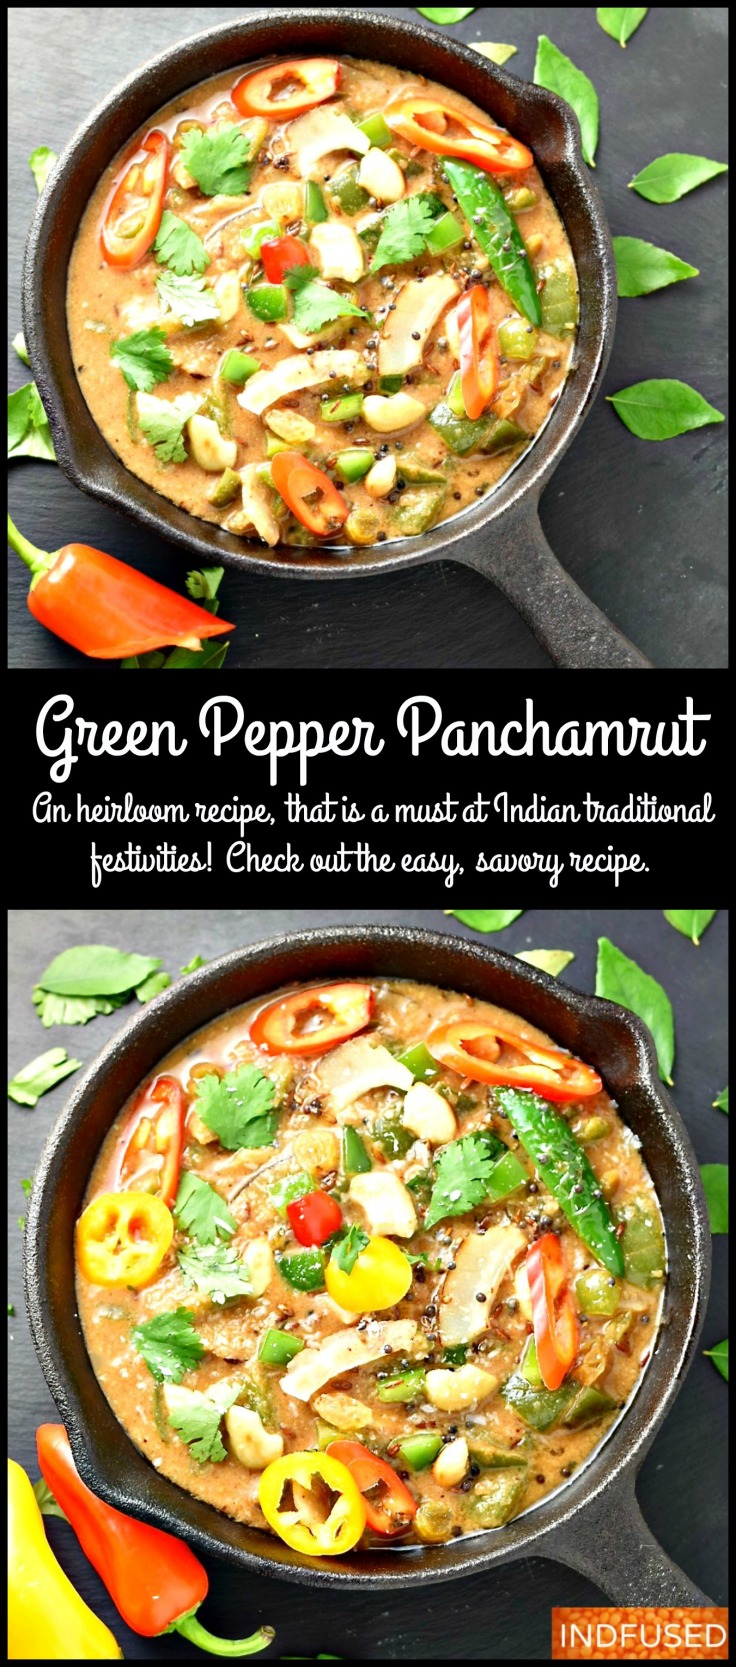 Green Pepper Panchamrut- a traditional savory dish which is a must for Indian festivities